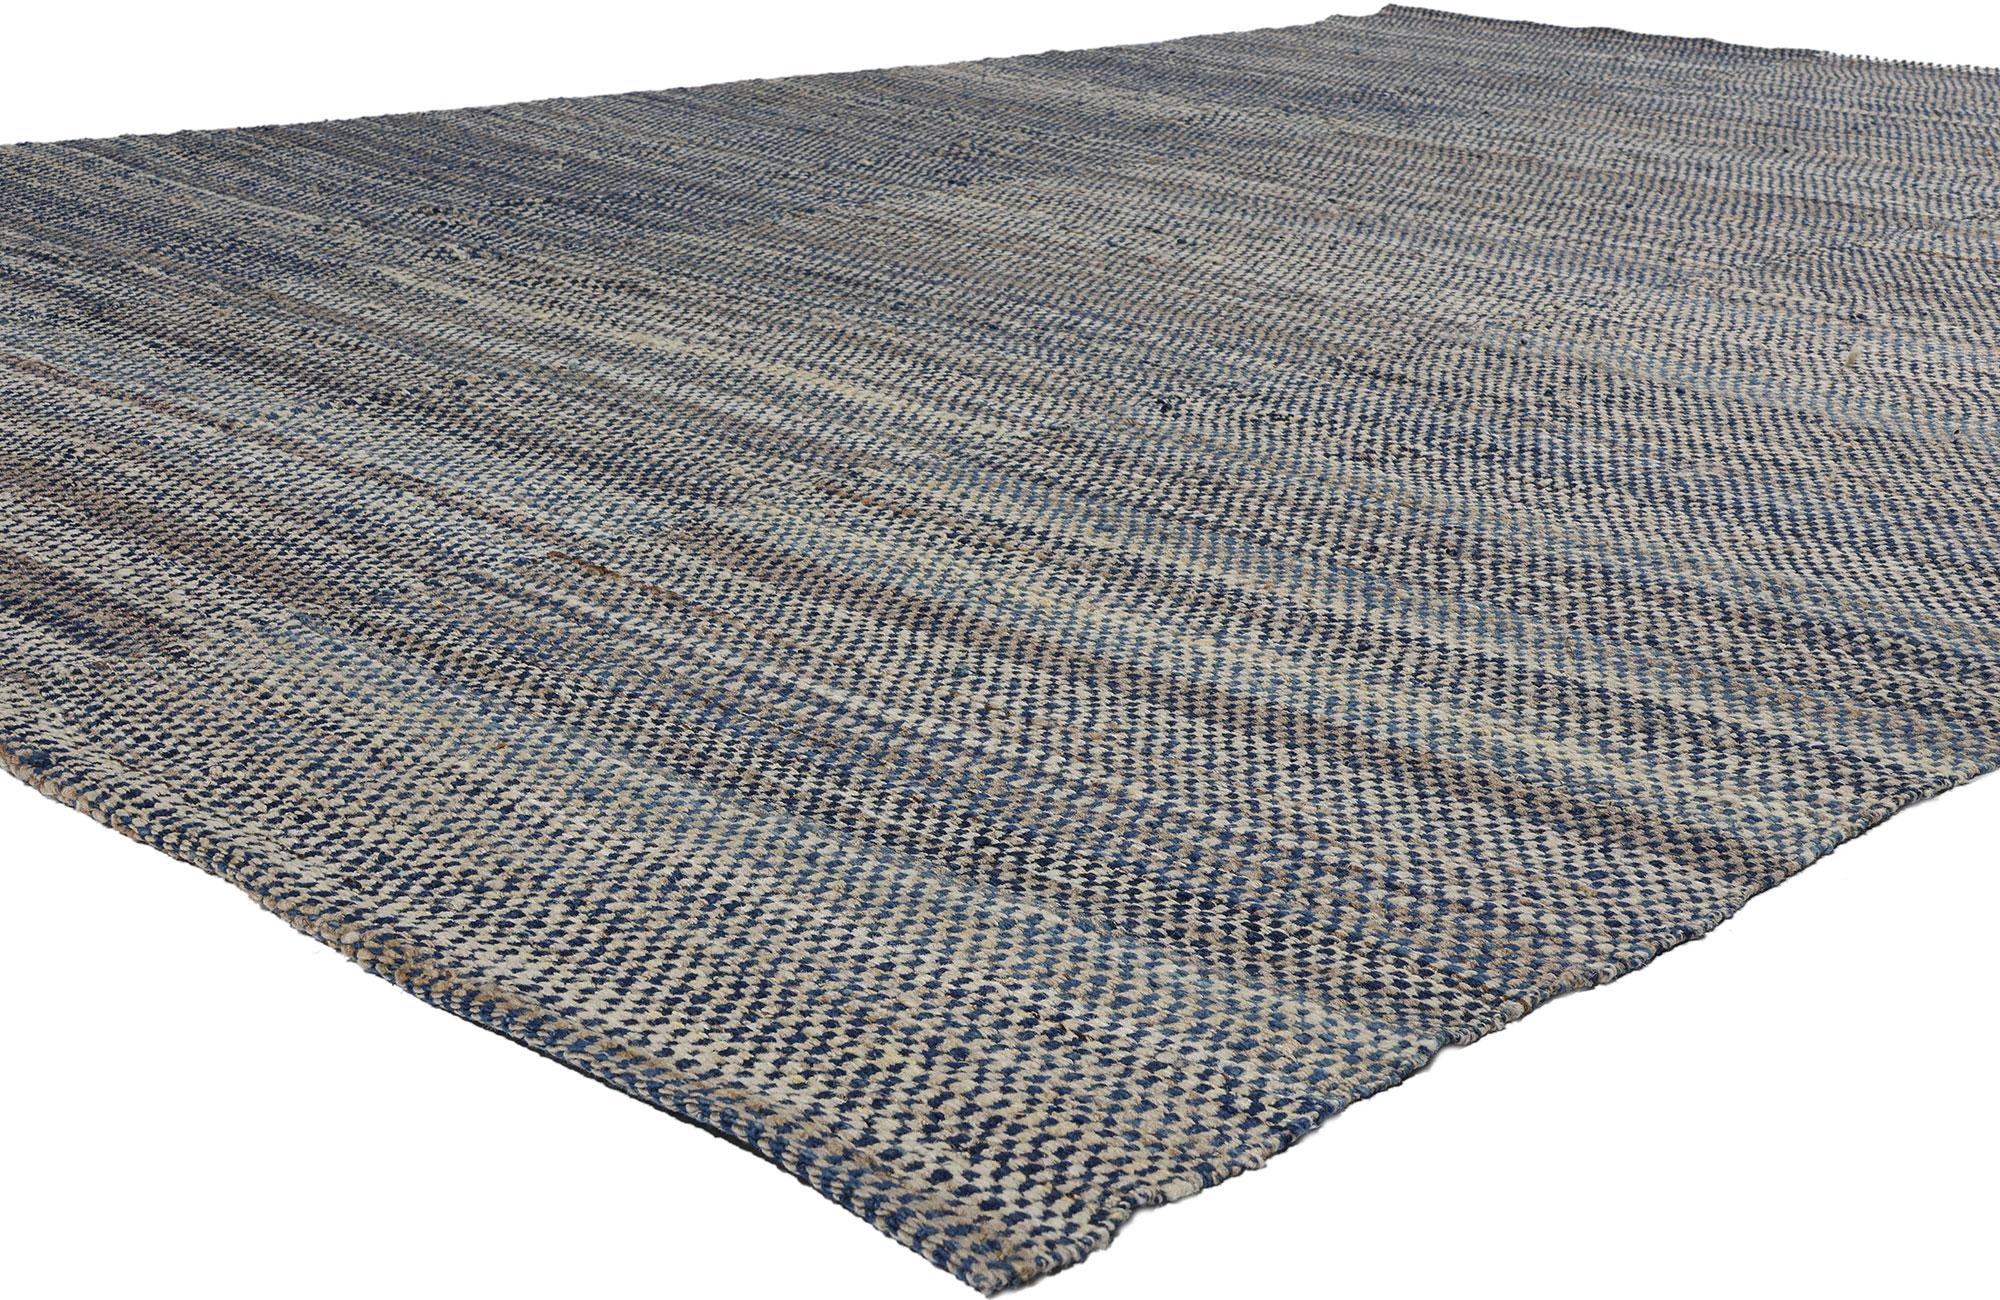 81098 Modern Blue Earth-Tone Kilim Rug, 08'07 x 12'00. Welcome to coastal elegance meets Southern Living charm with our handwoven modern blue earth-tone checkered kilim rug. Crafted with precision and care, this flatweave rug features a modern